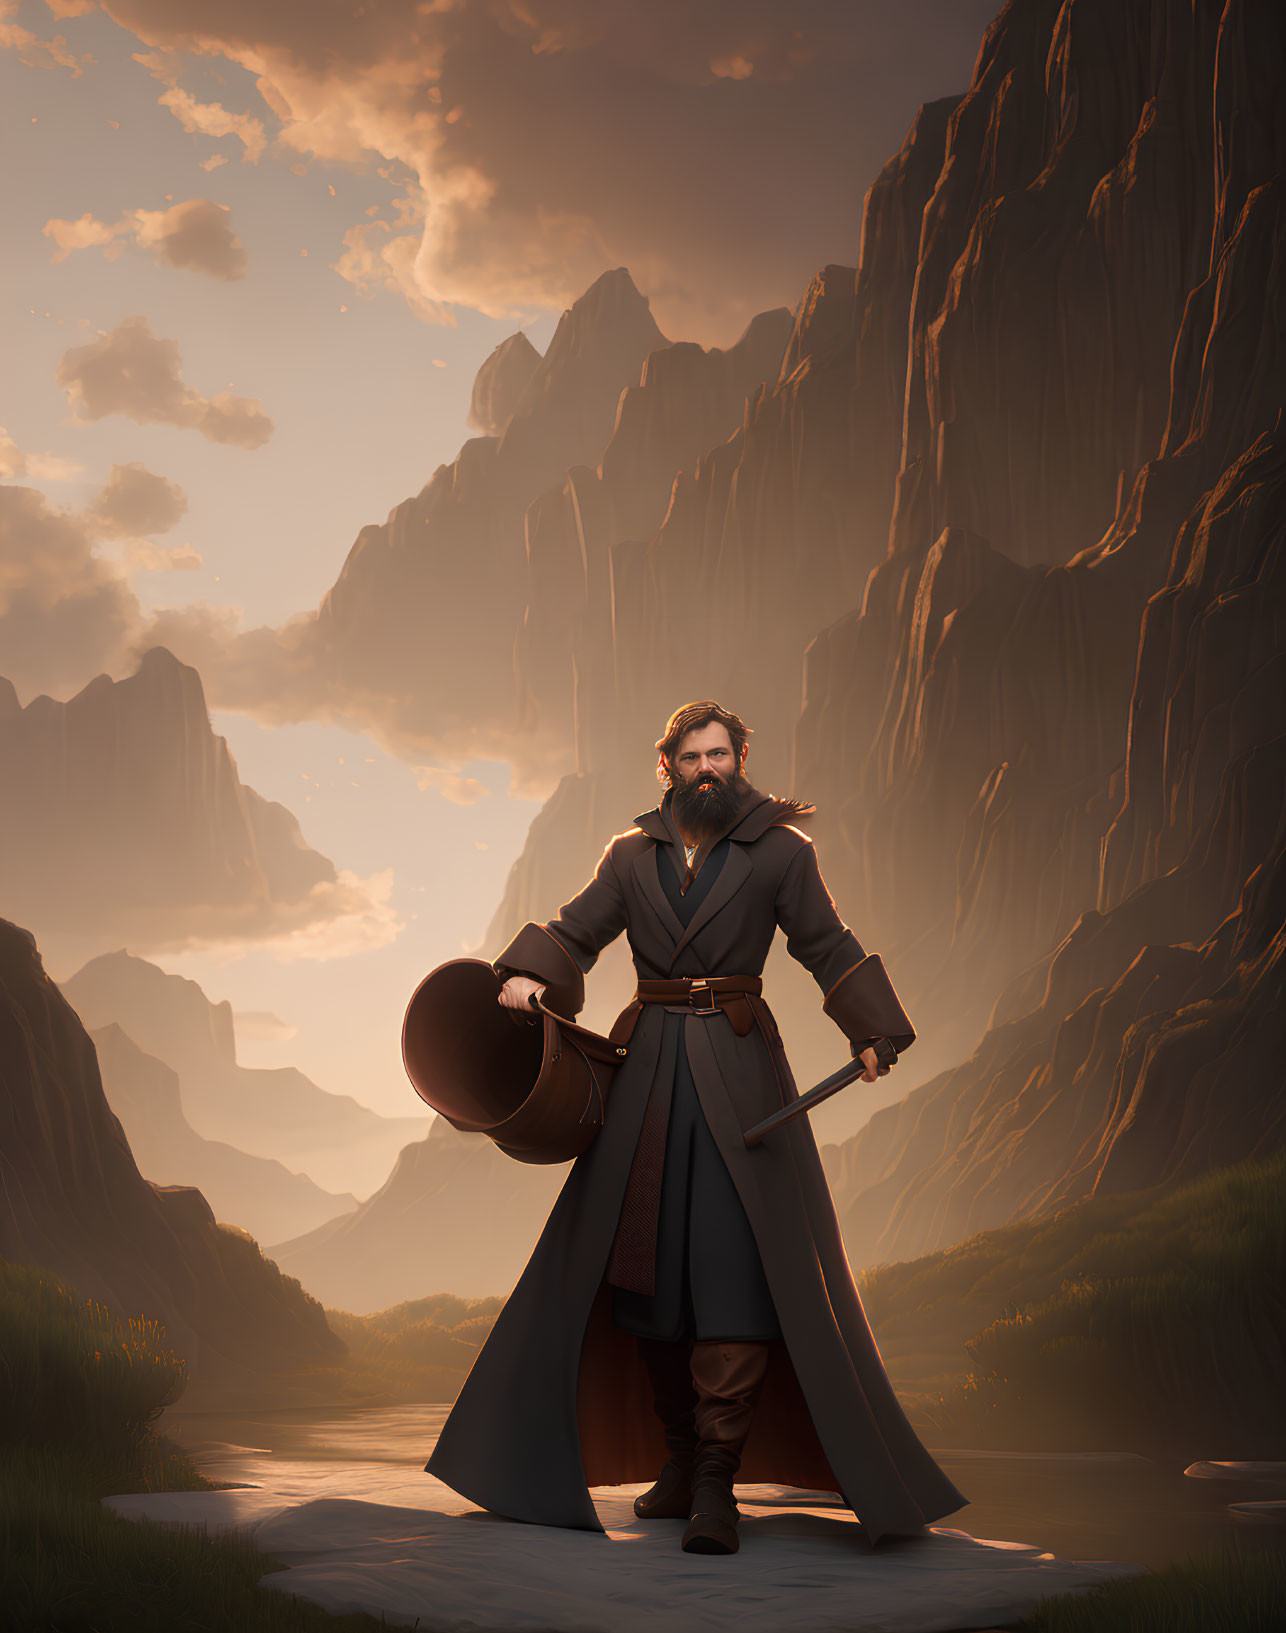 Bearded man in medieval attire on path with cliffs at sunset